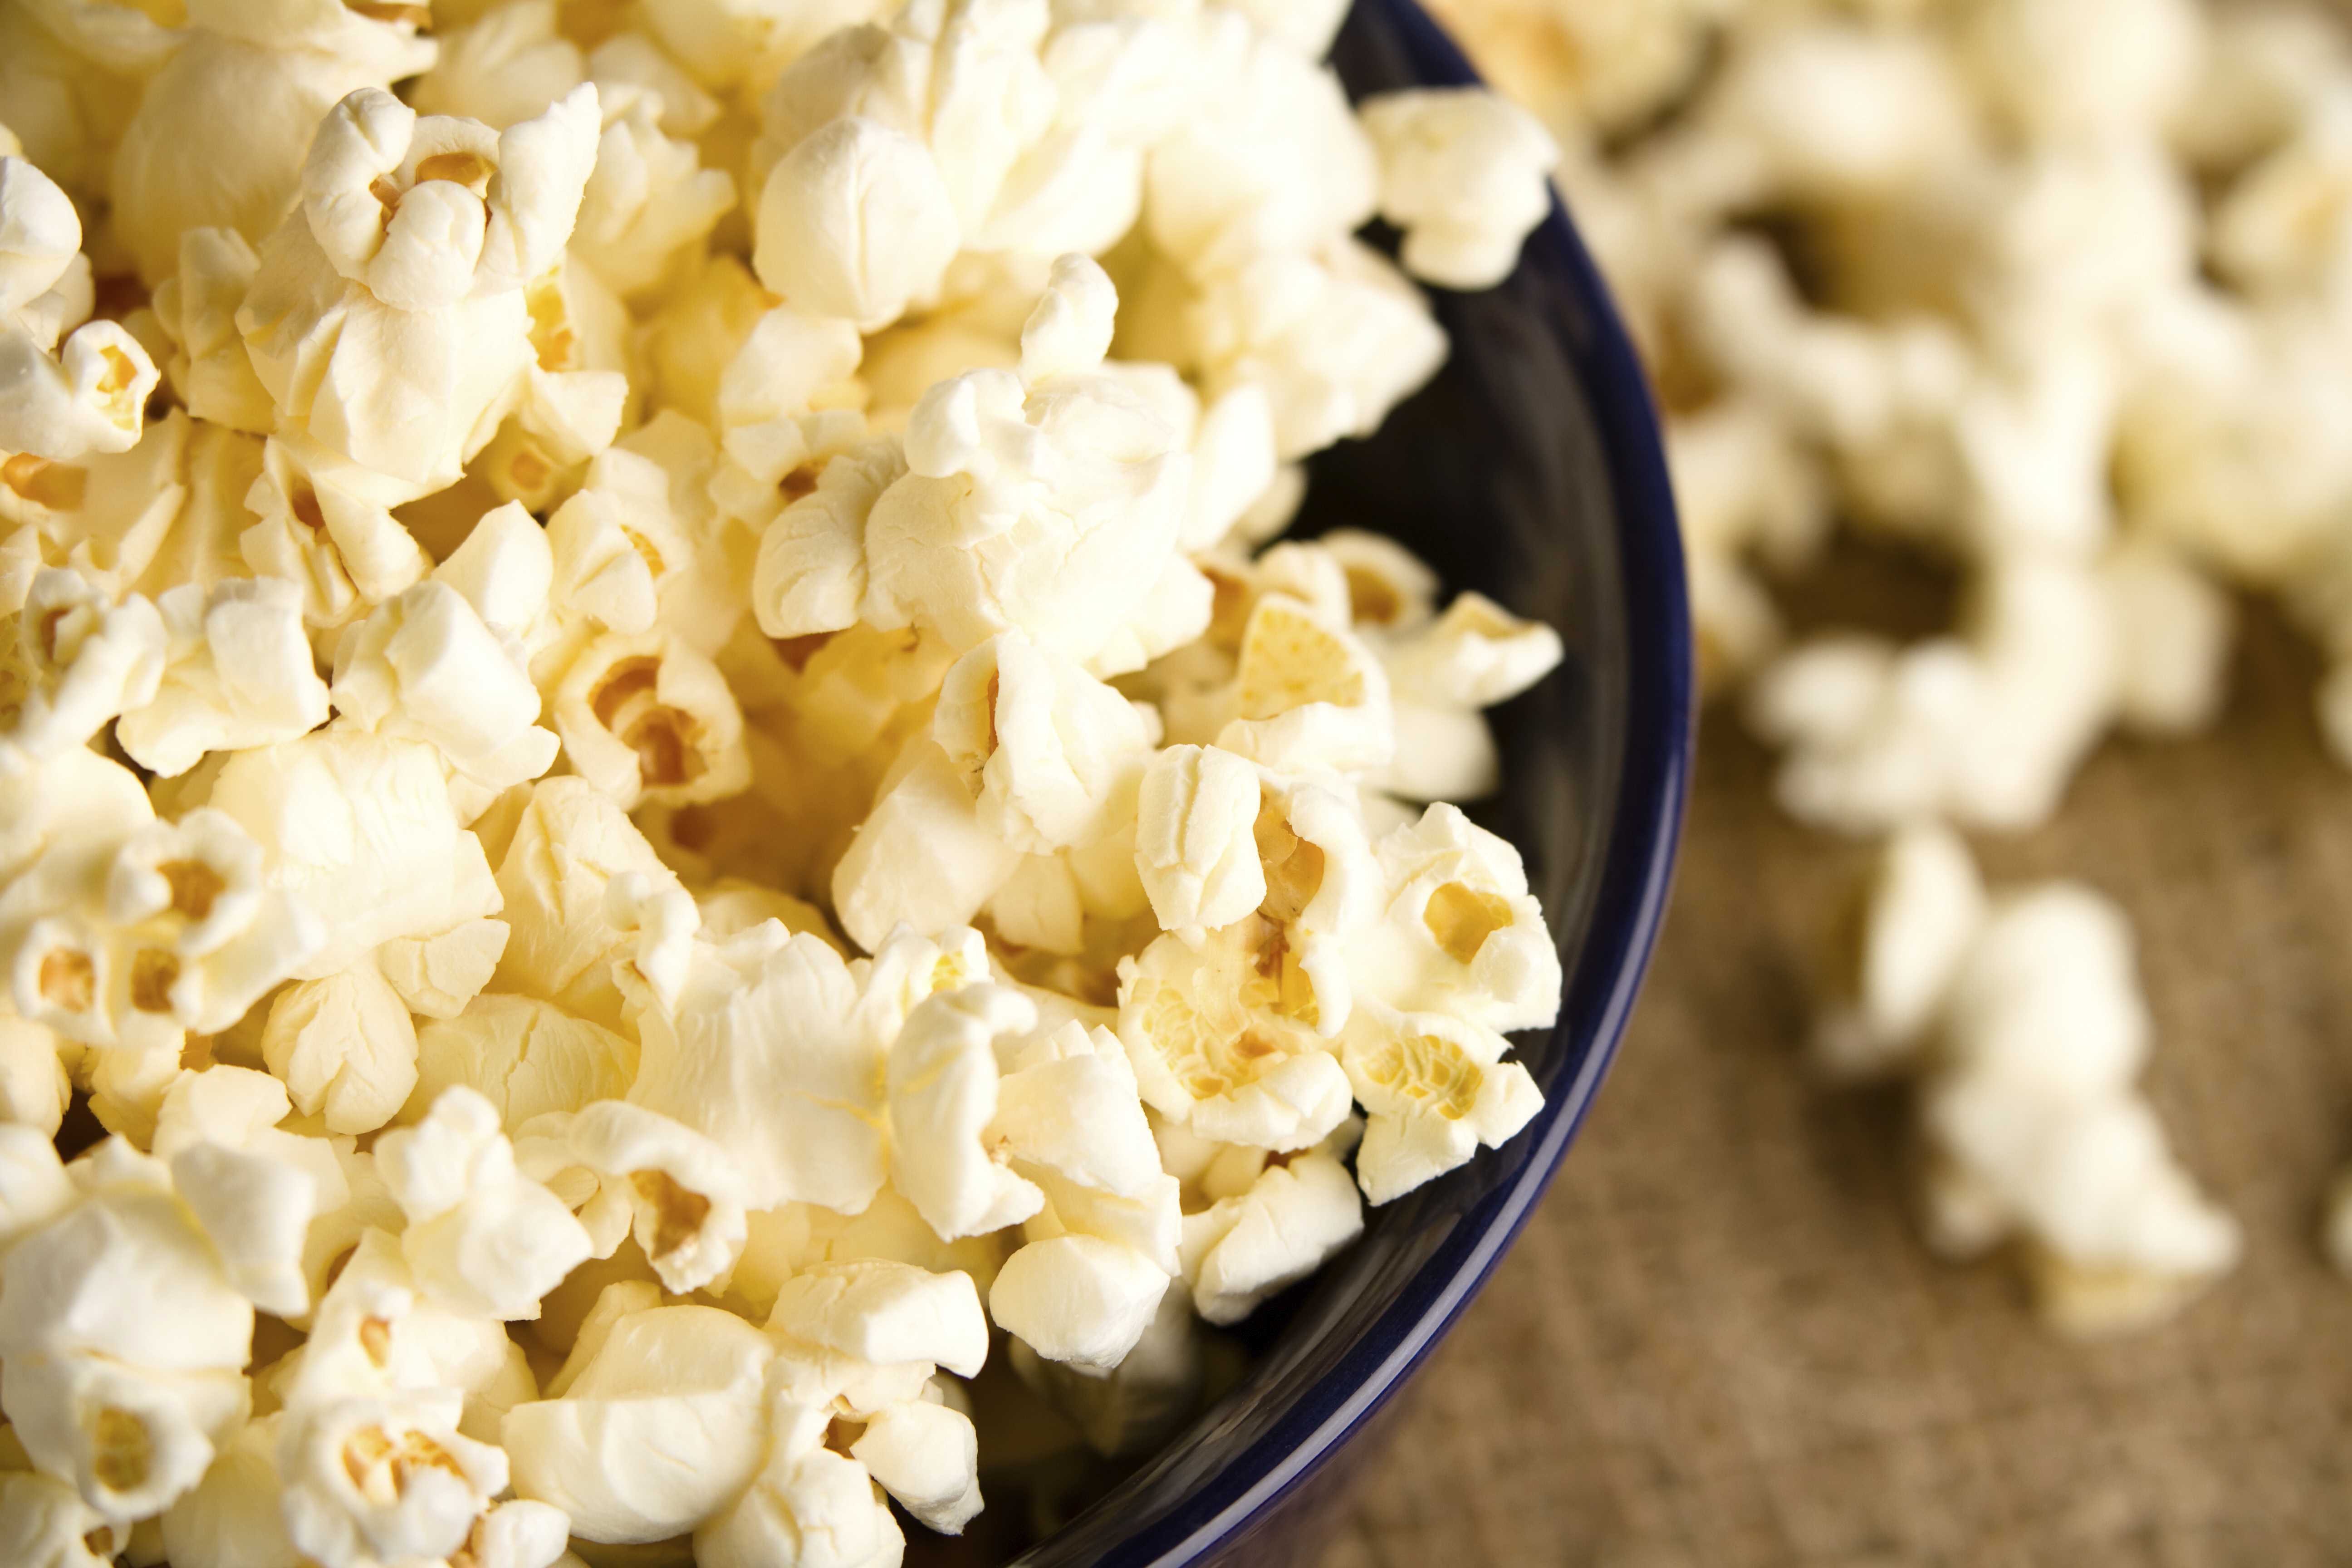 You can tailor your popcorn flavors to your wants and needs: spicy, sweet, salty or a mix of all of the above. 